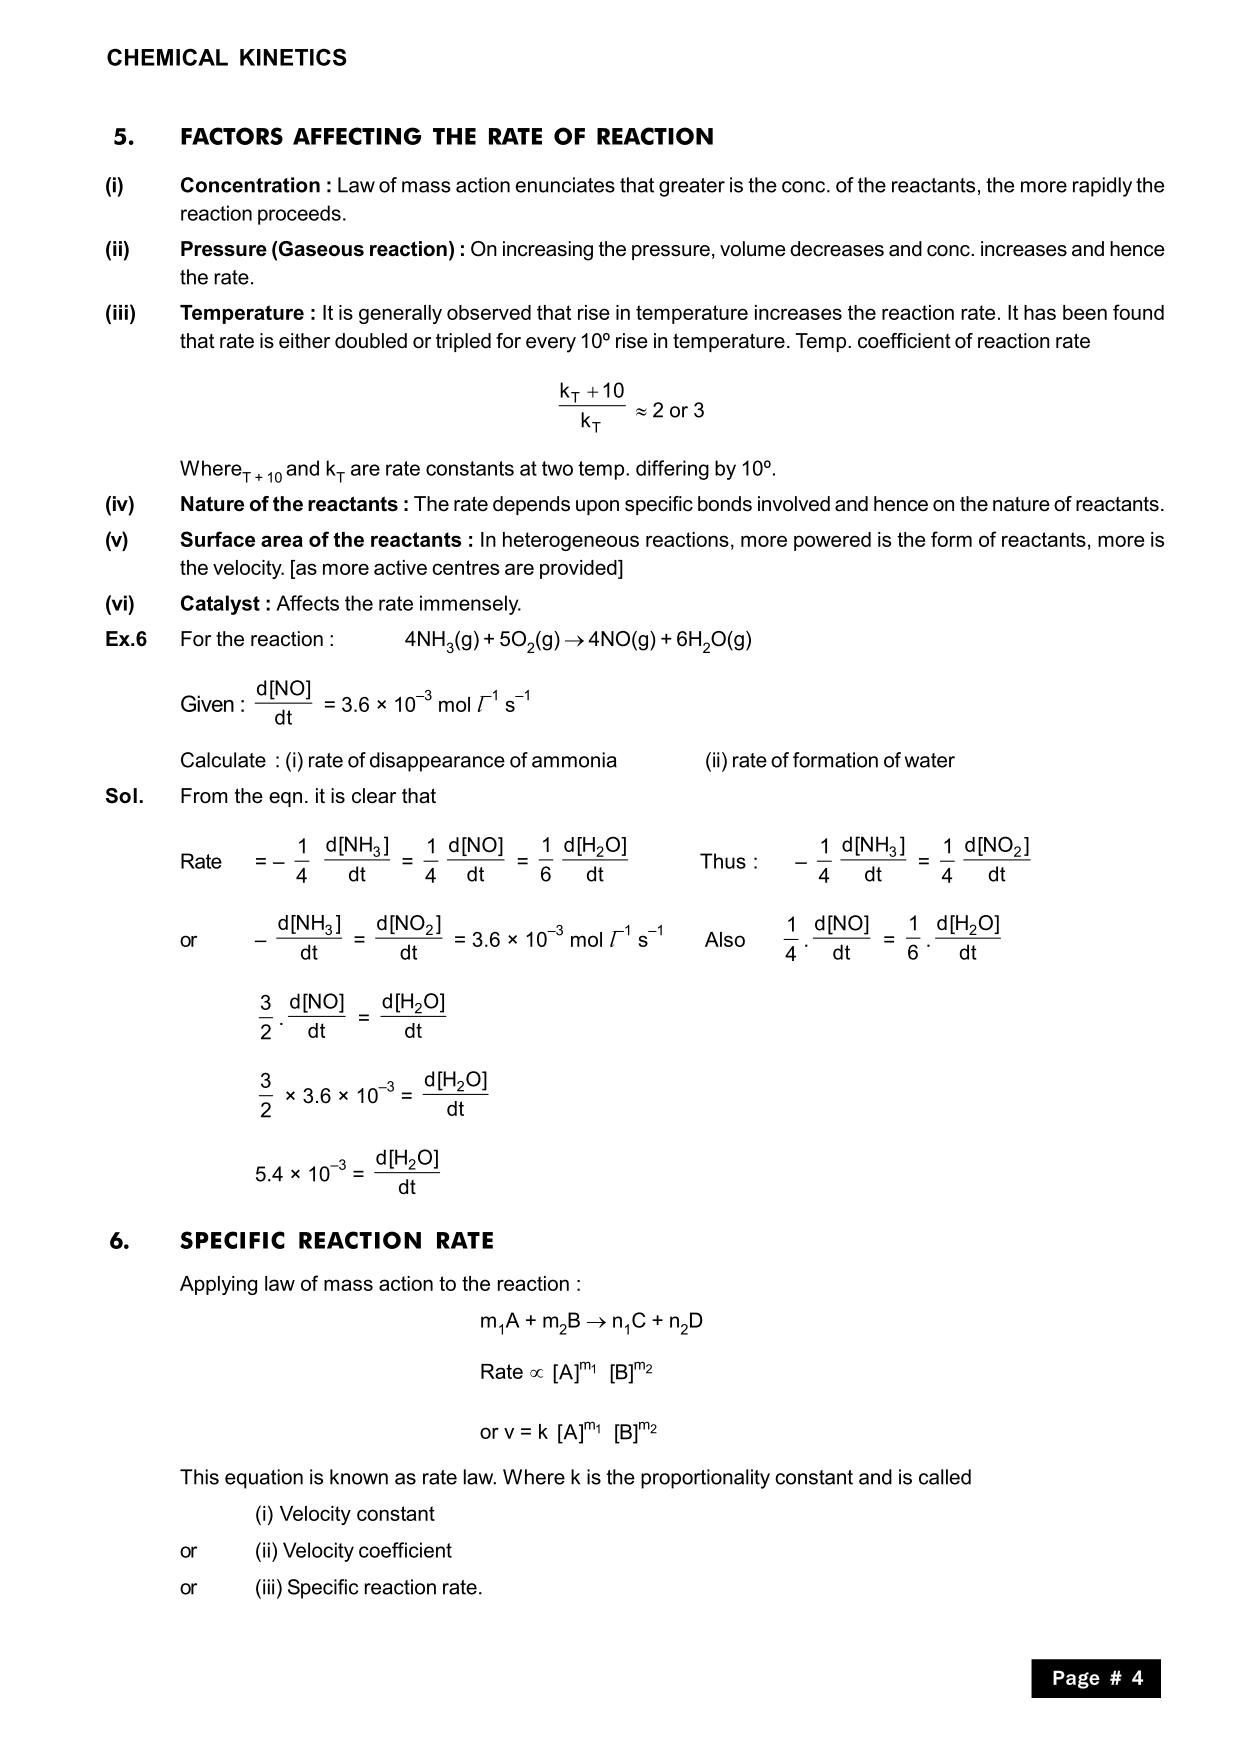 Chemical Kinetics Class 12 Notes: Specific Reaction Rate